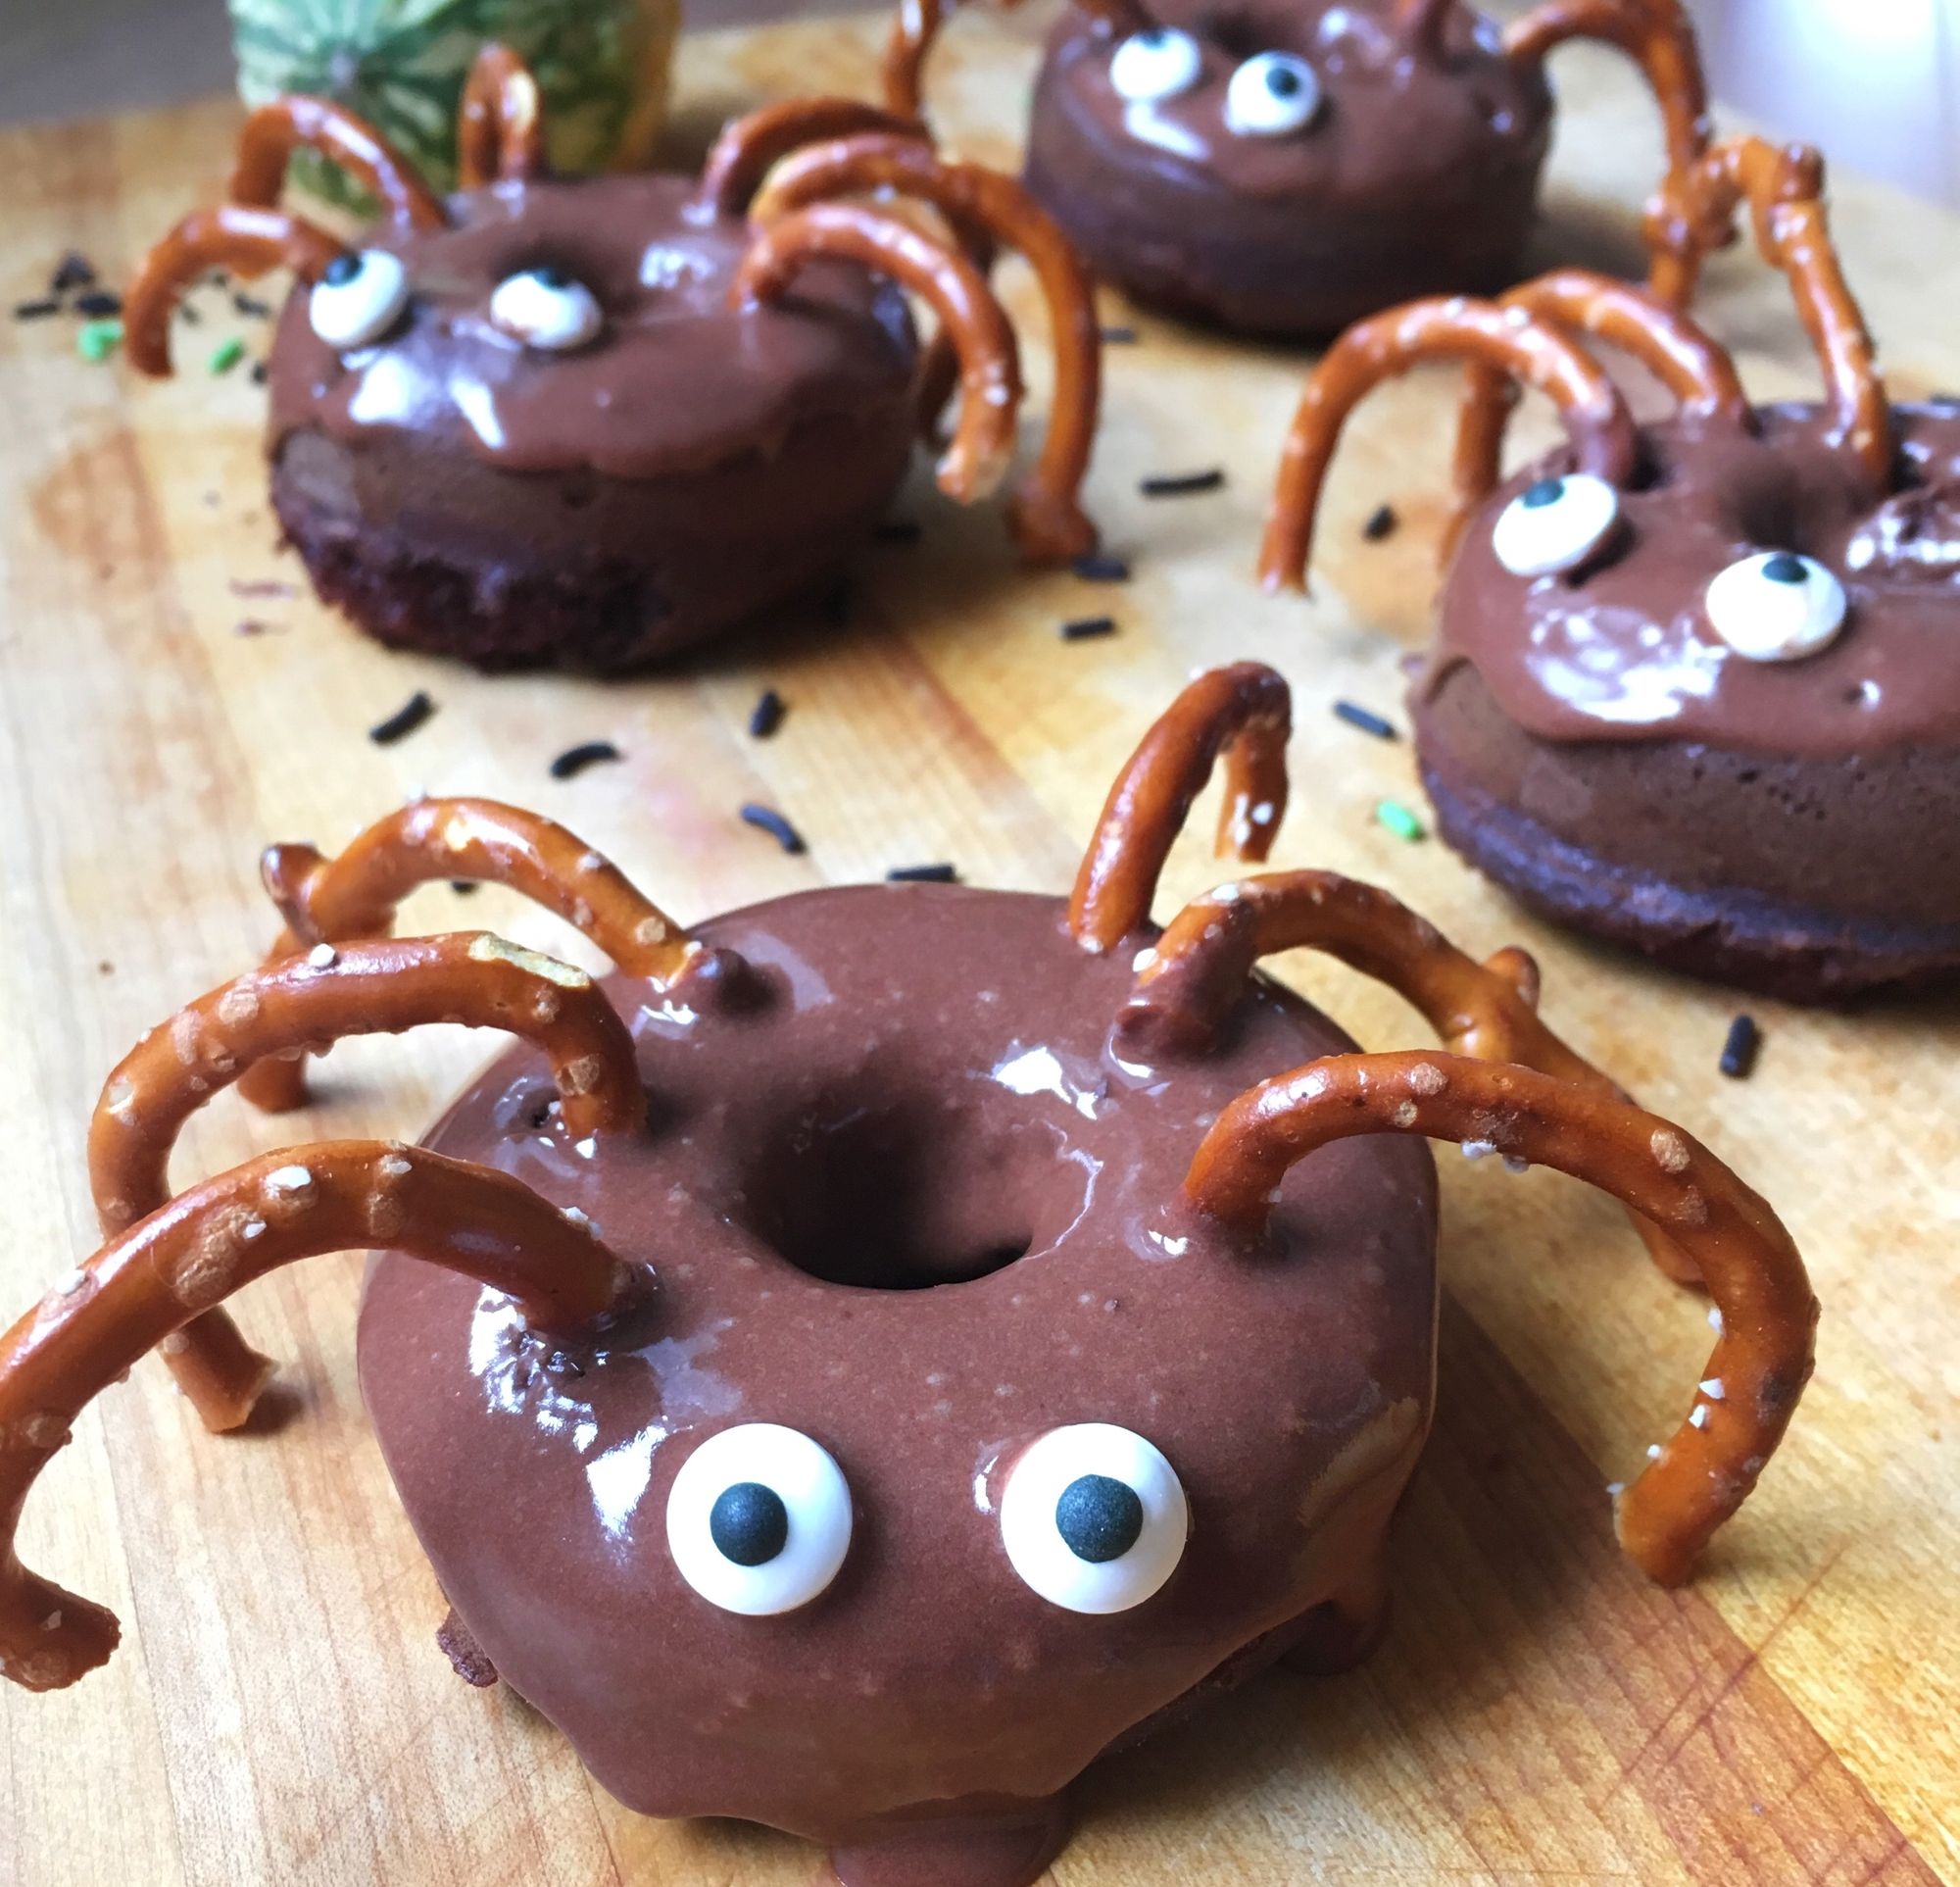 "Spider" Chocolate Donuts